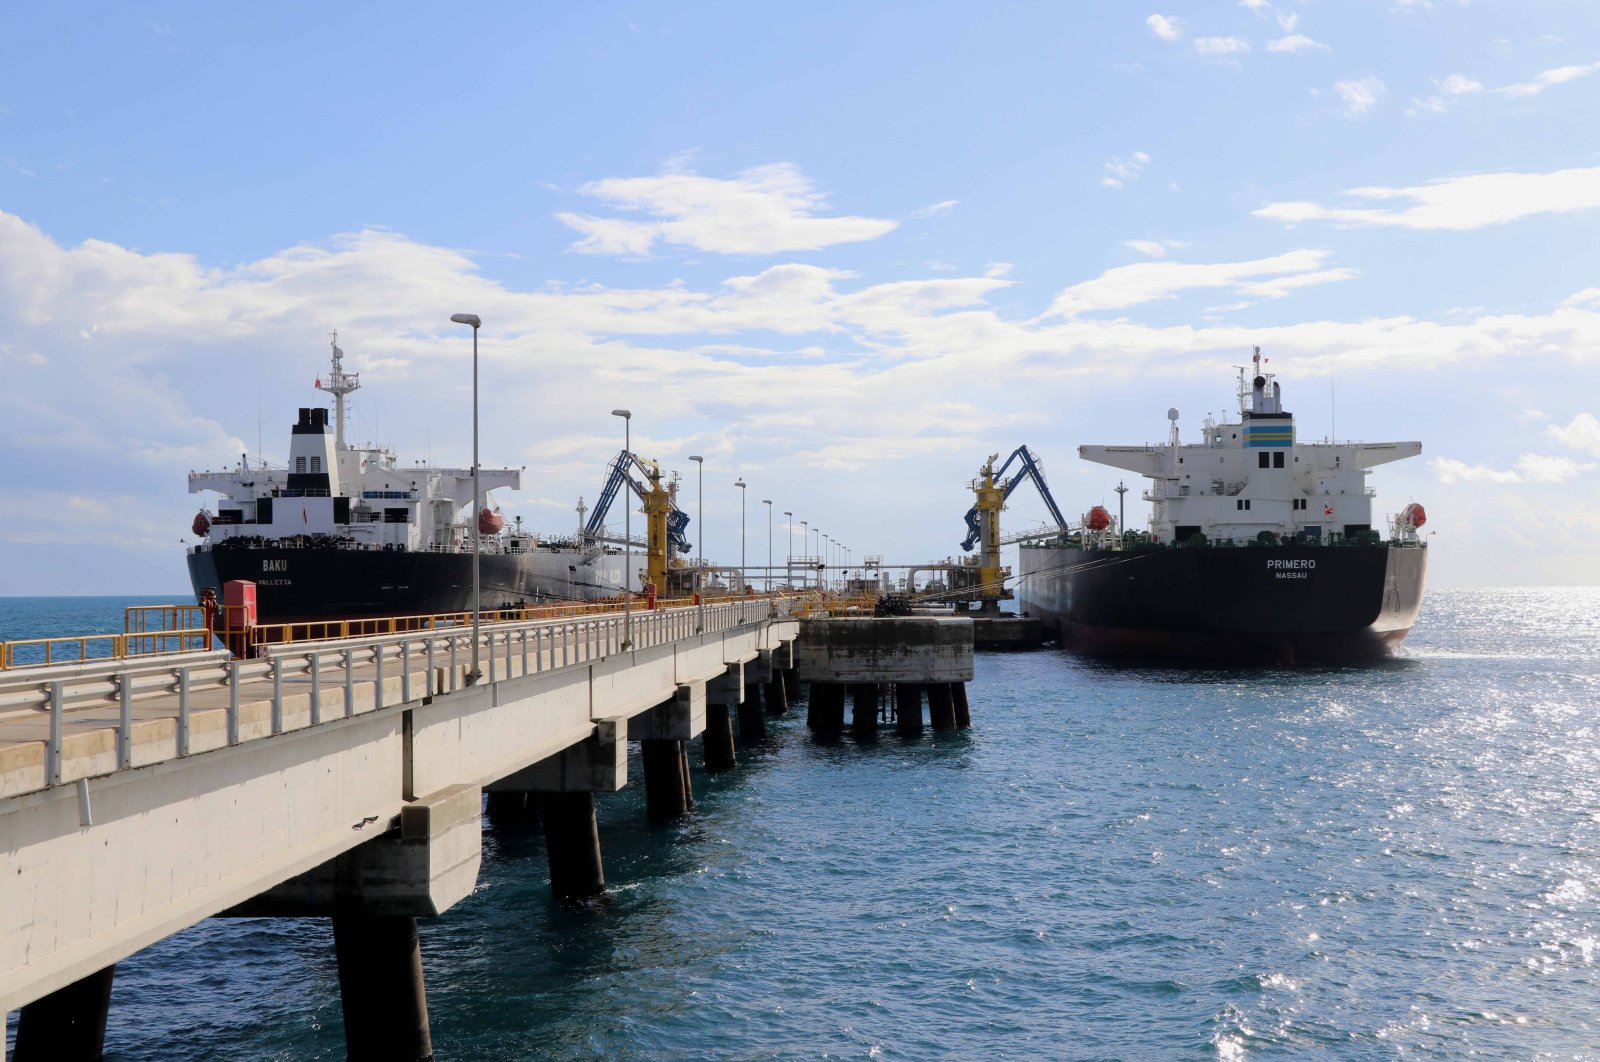 The BTC pipeline delivered 3.4 billion barrels of crude oil shipped from the marine terminal at Ceyhan in southern Turkey's Adana in 14 years. ( BOTAS Internatıonal via AA)